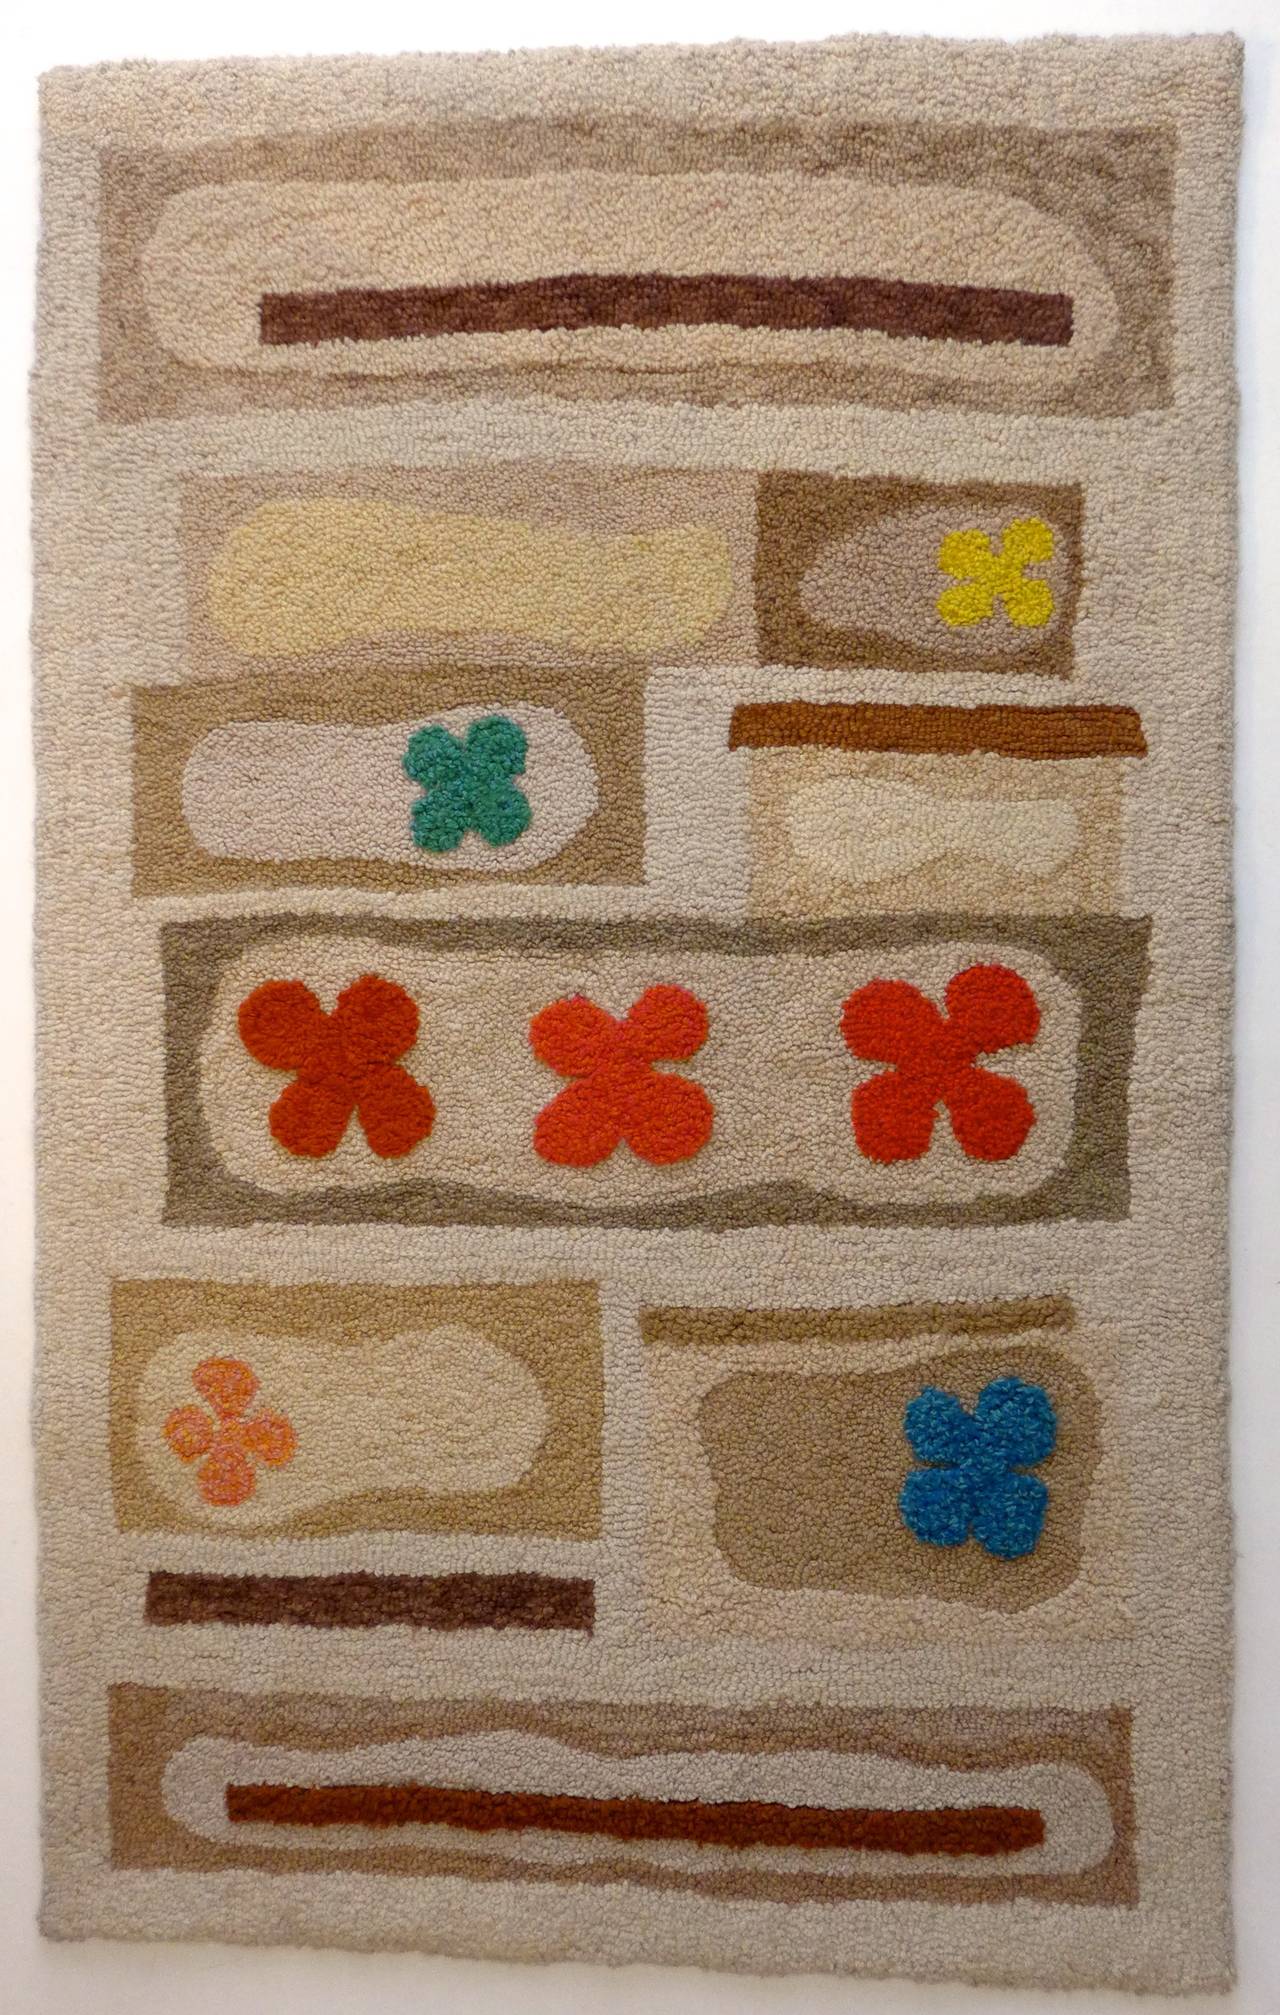 Hand-tufted wool rug with an abstract design featuring bright colors on a beige and cream background. Attributed to V'Soske, circa 1960. The original owner had it hanging vertically on the wall (see attached picture), fastened with a wooden batten,